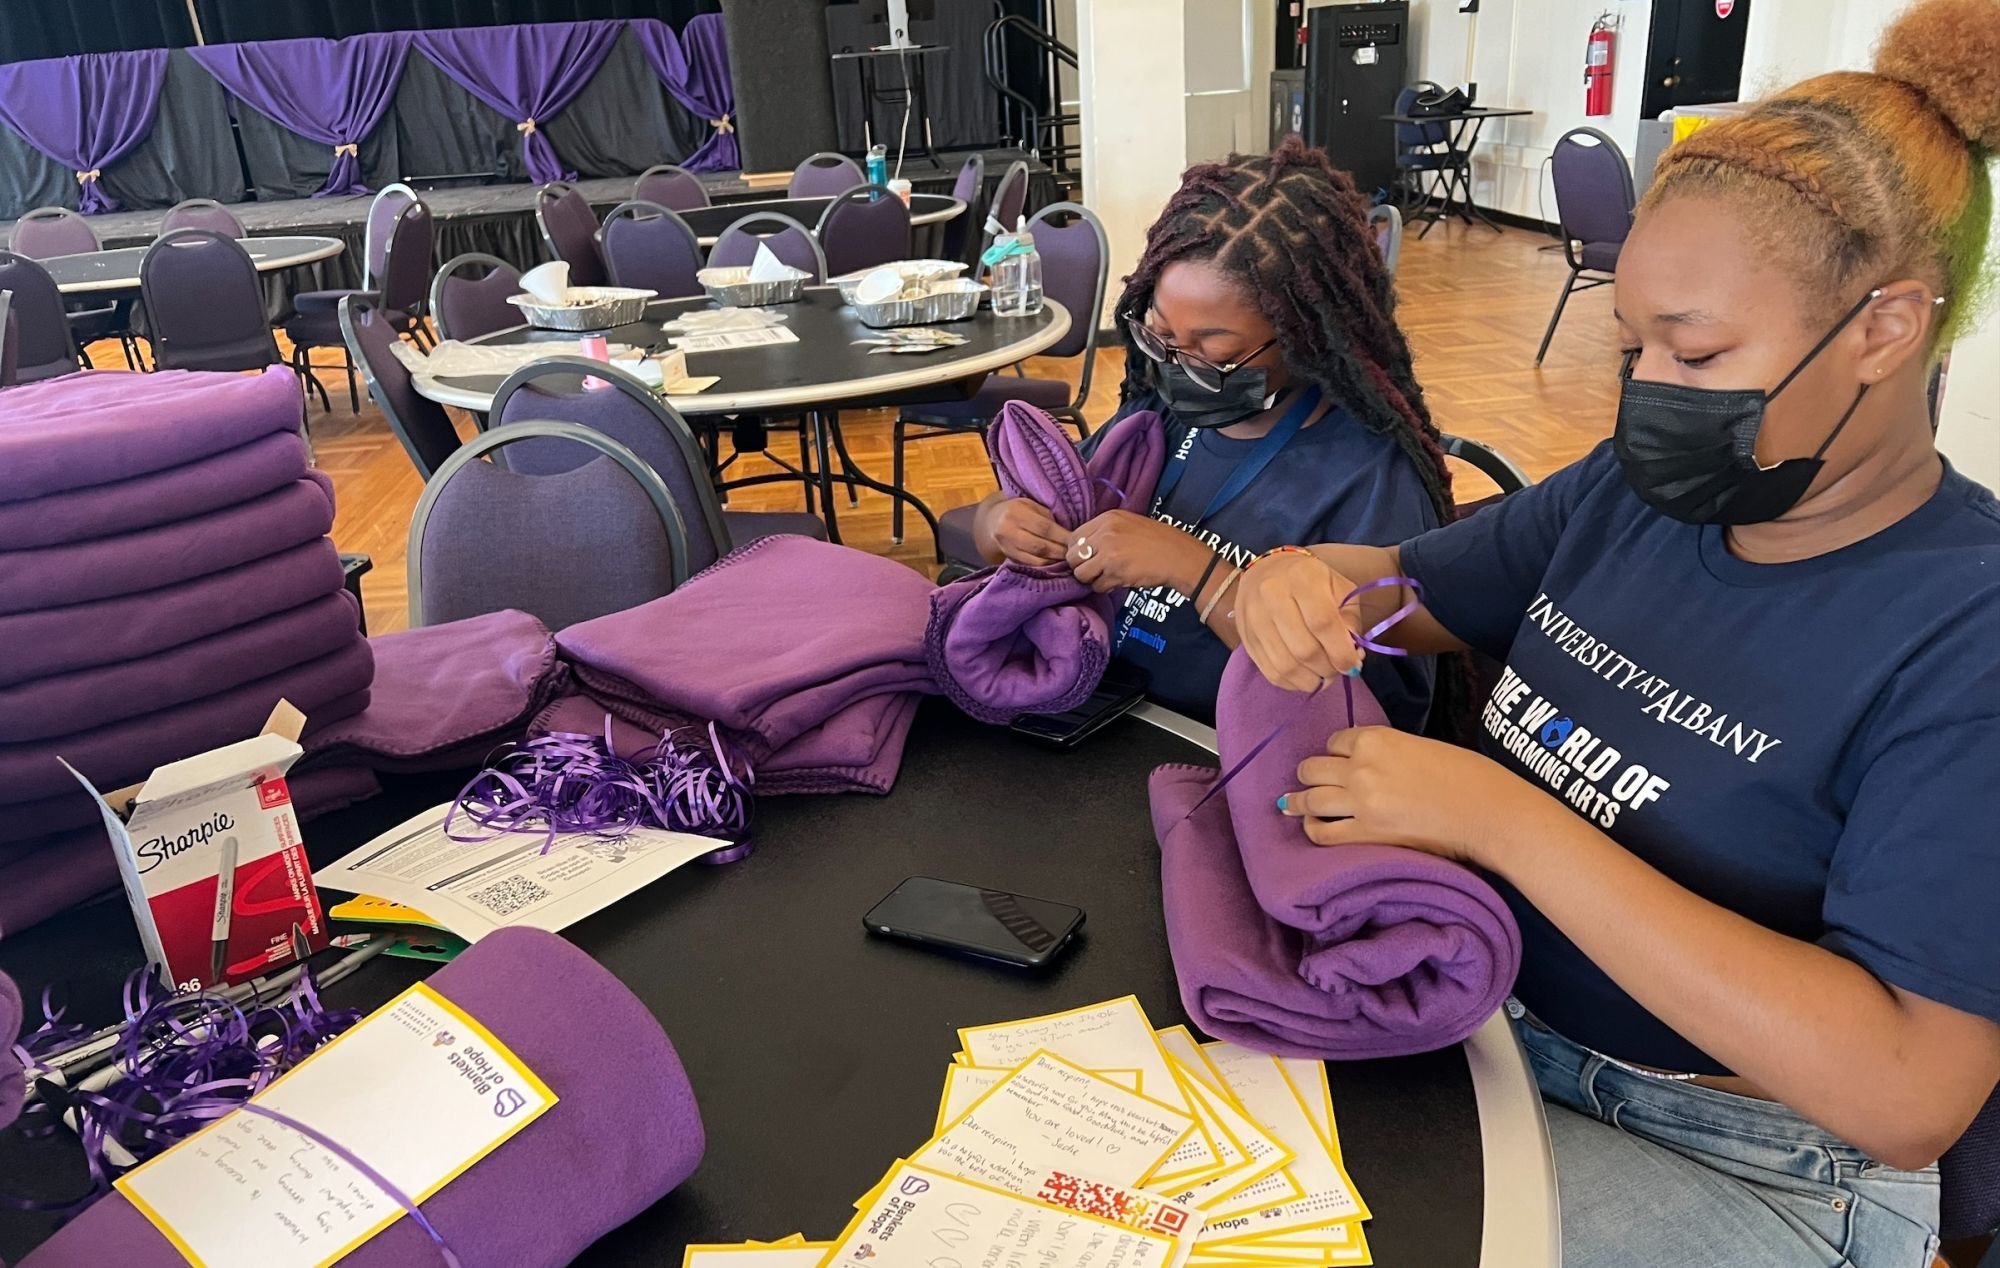 Two masked students in matching navy blue T-shirts that say "The World of Performing Arts" tie ribbons around purple blankets.